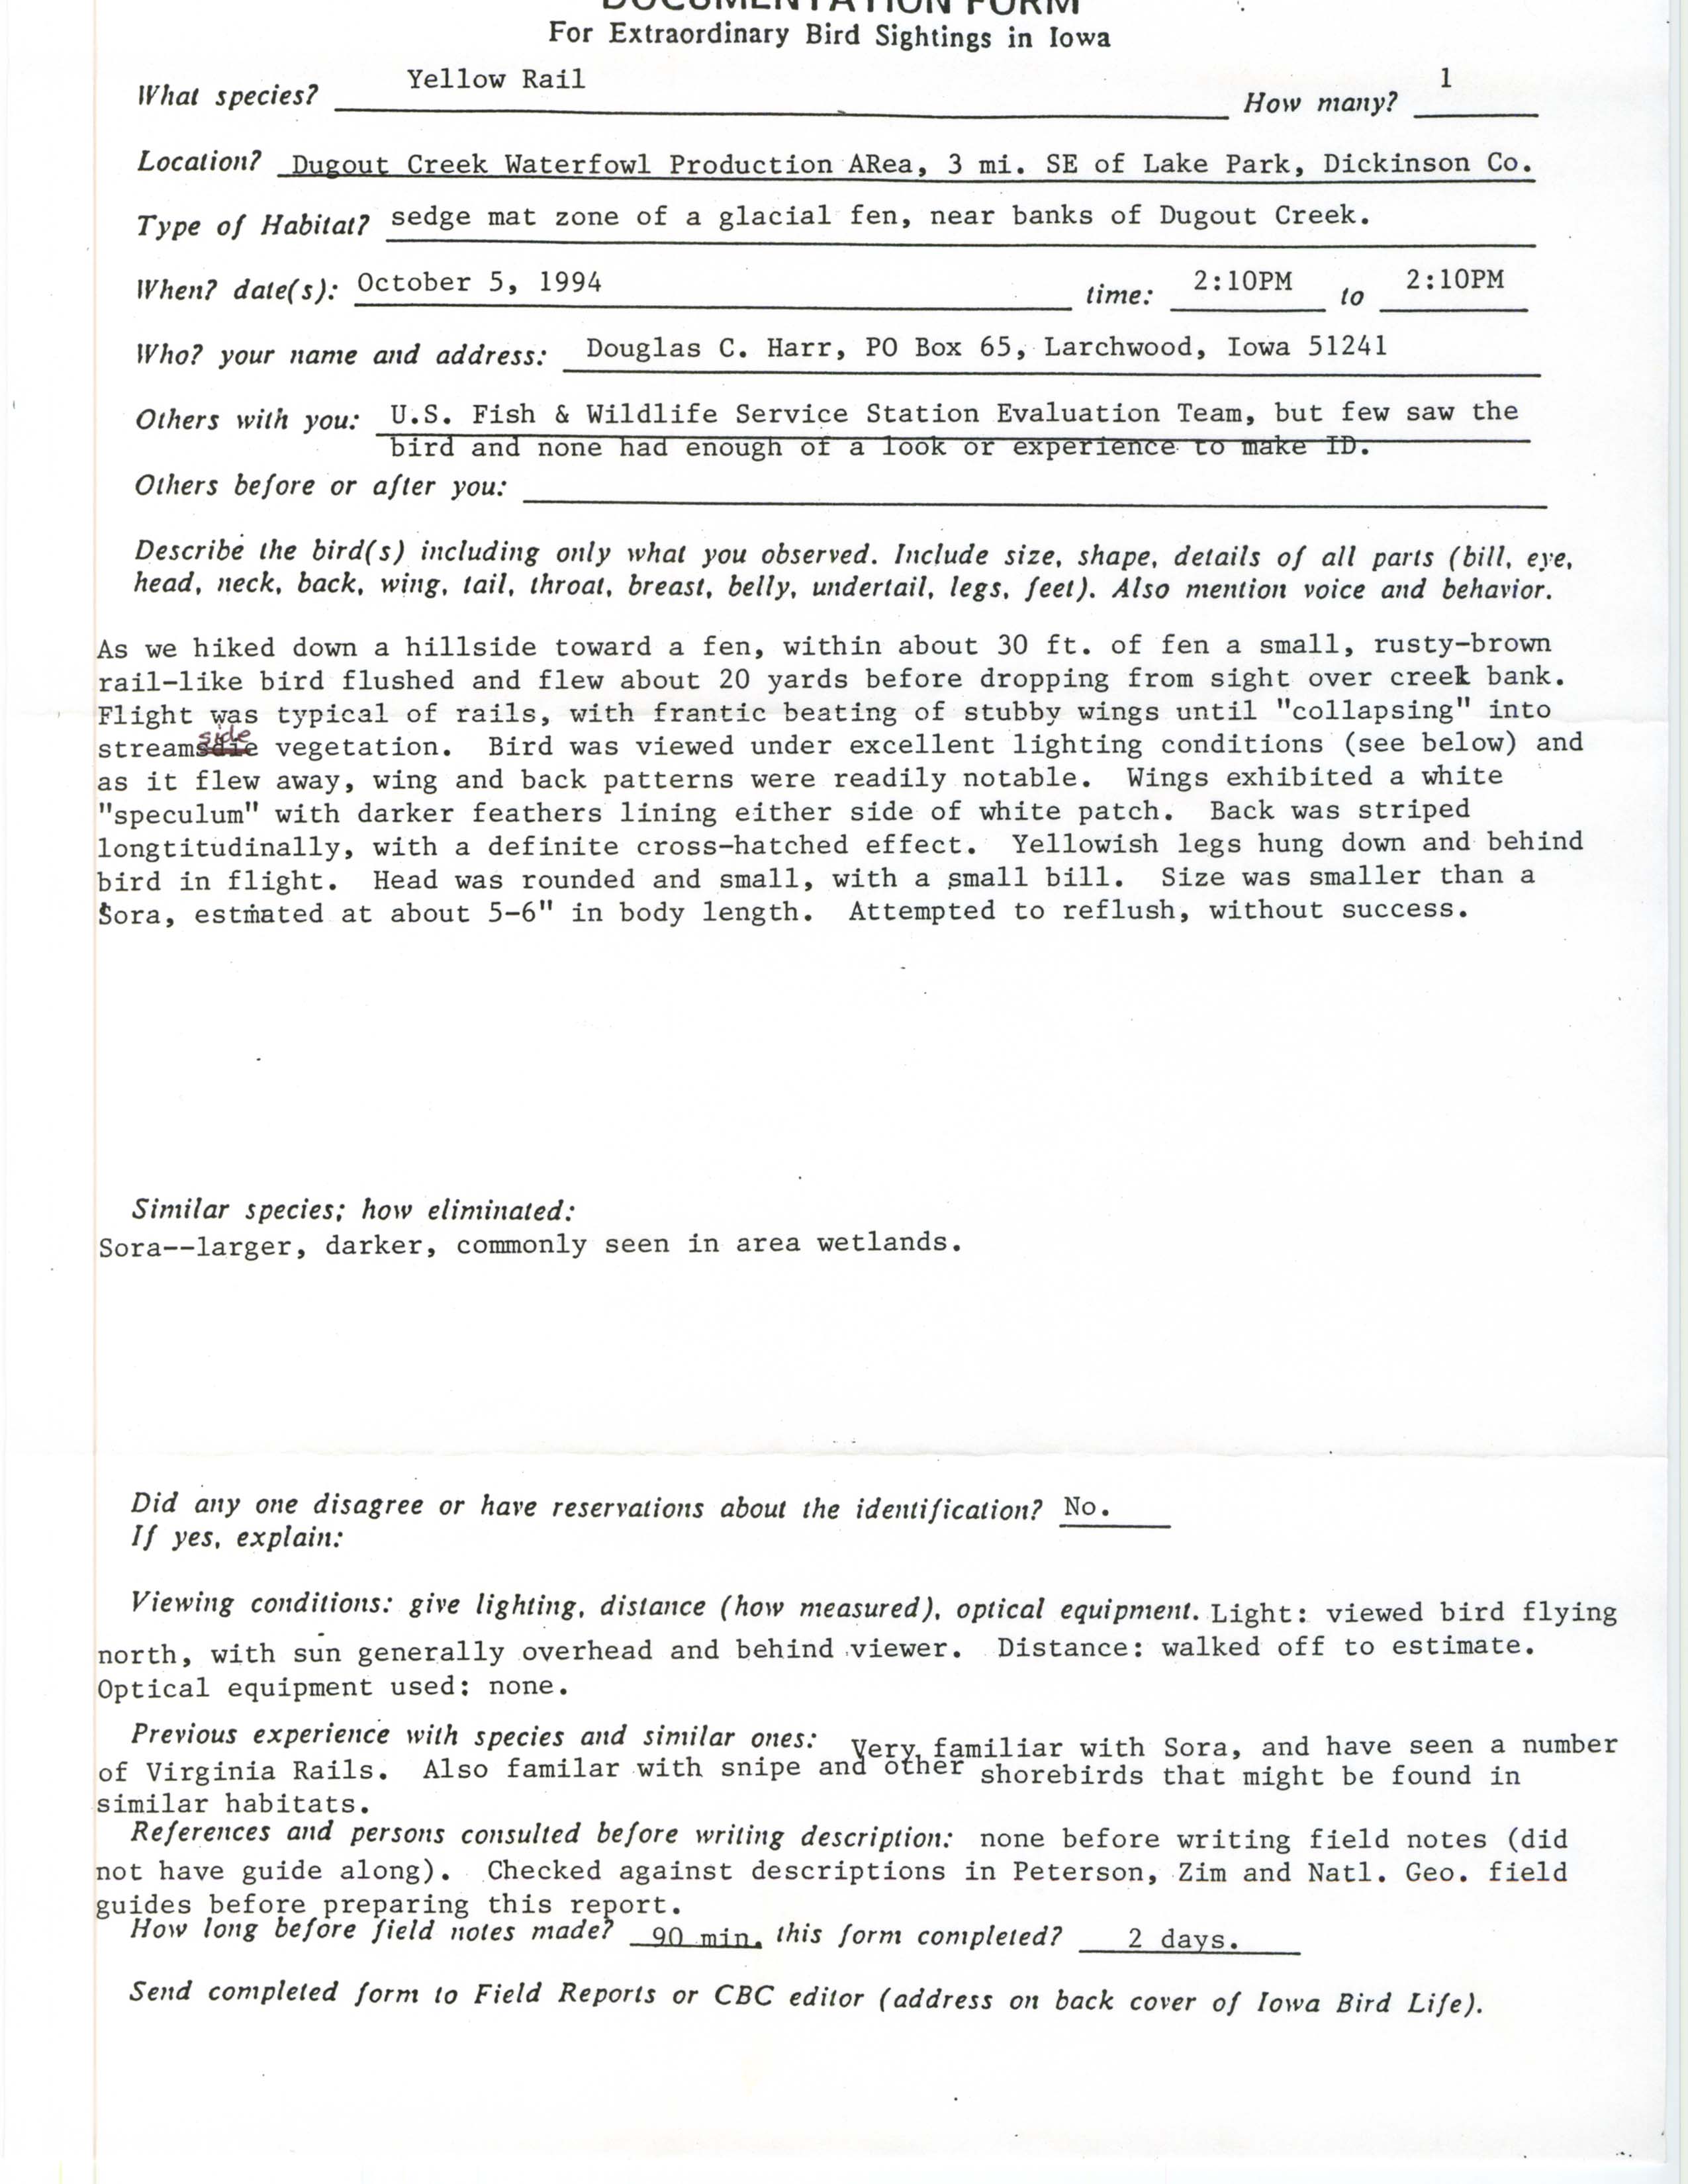 Rare bird documentation form for Yellow Rail at Dugout Creek Waterfowl Production Area, 1994